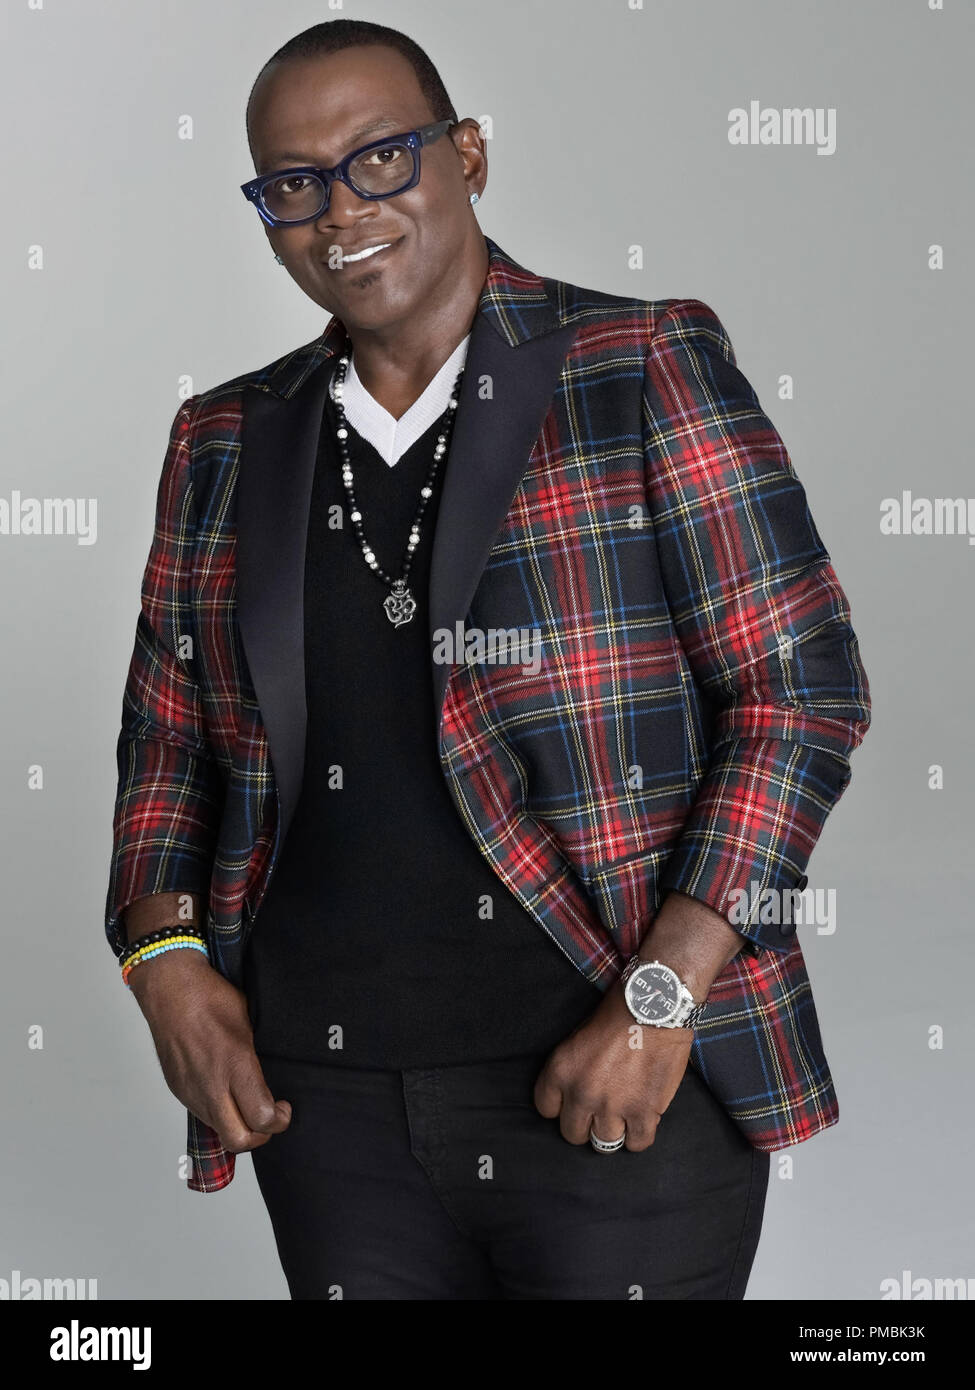 AMERICAN IDOL XIII: IDOL Veteran Randy Jackson will lend his industry and IDOL expertise to the contestants as an in-house mentor on AMERICAN IDOL XIII. Stock Photo